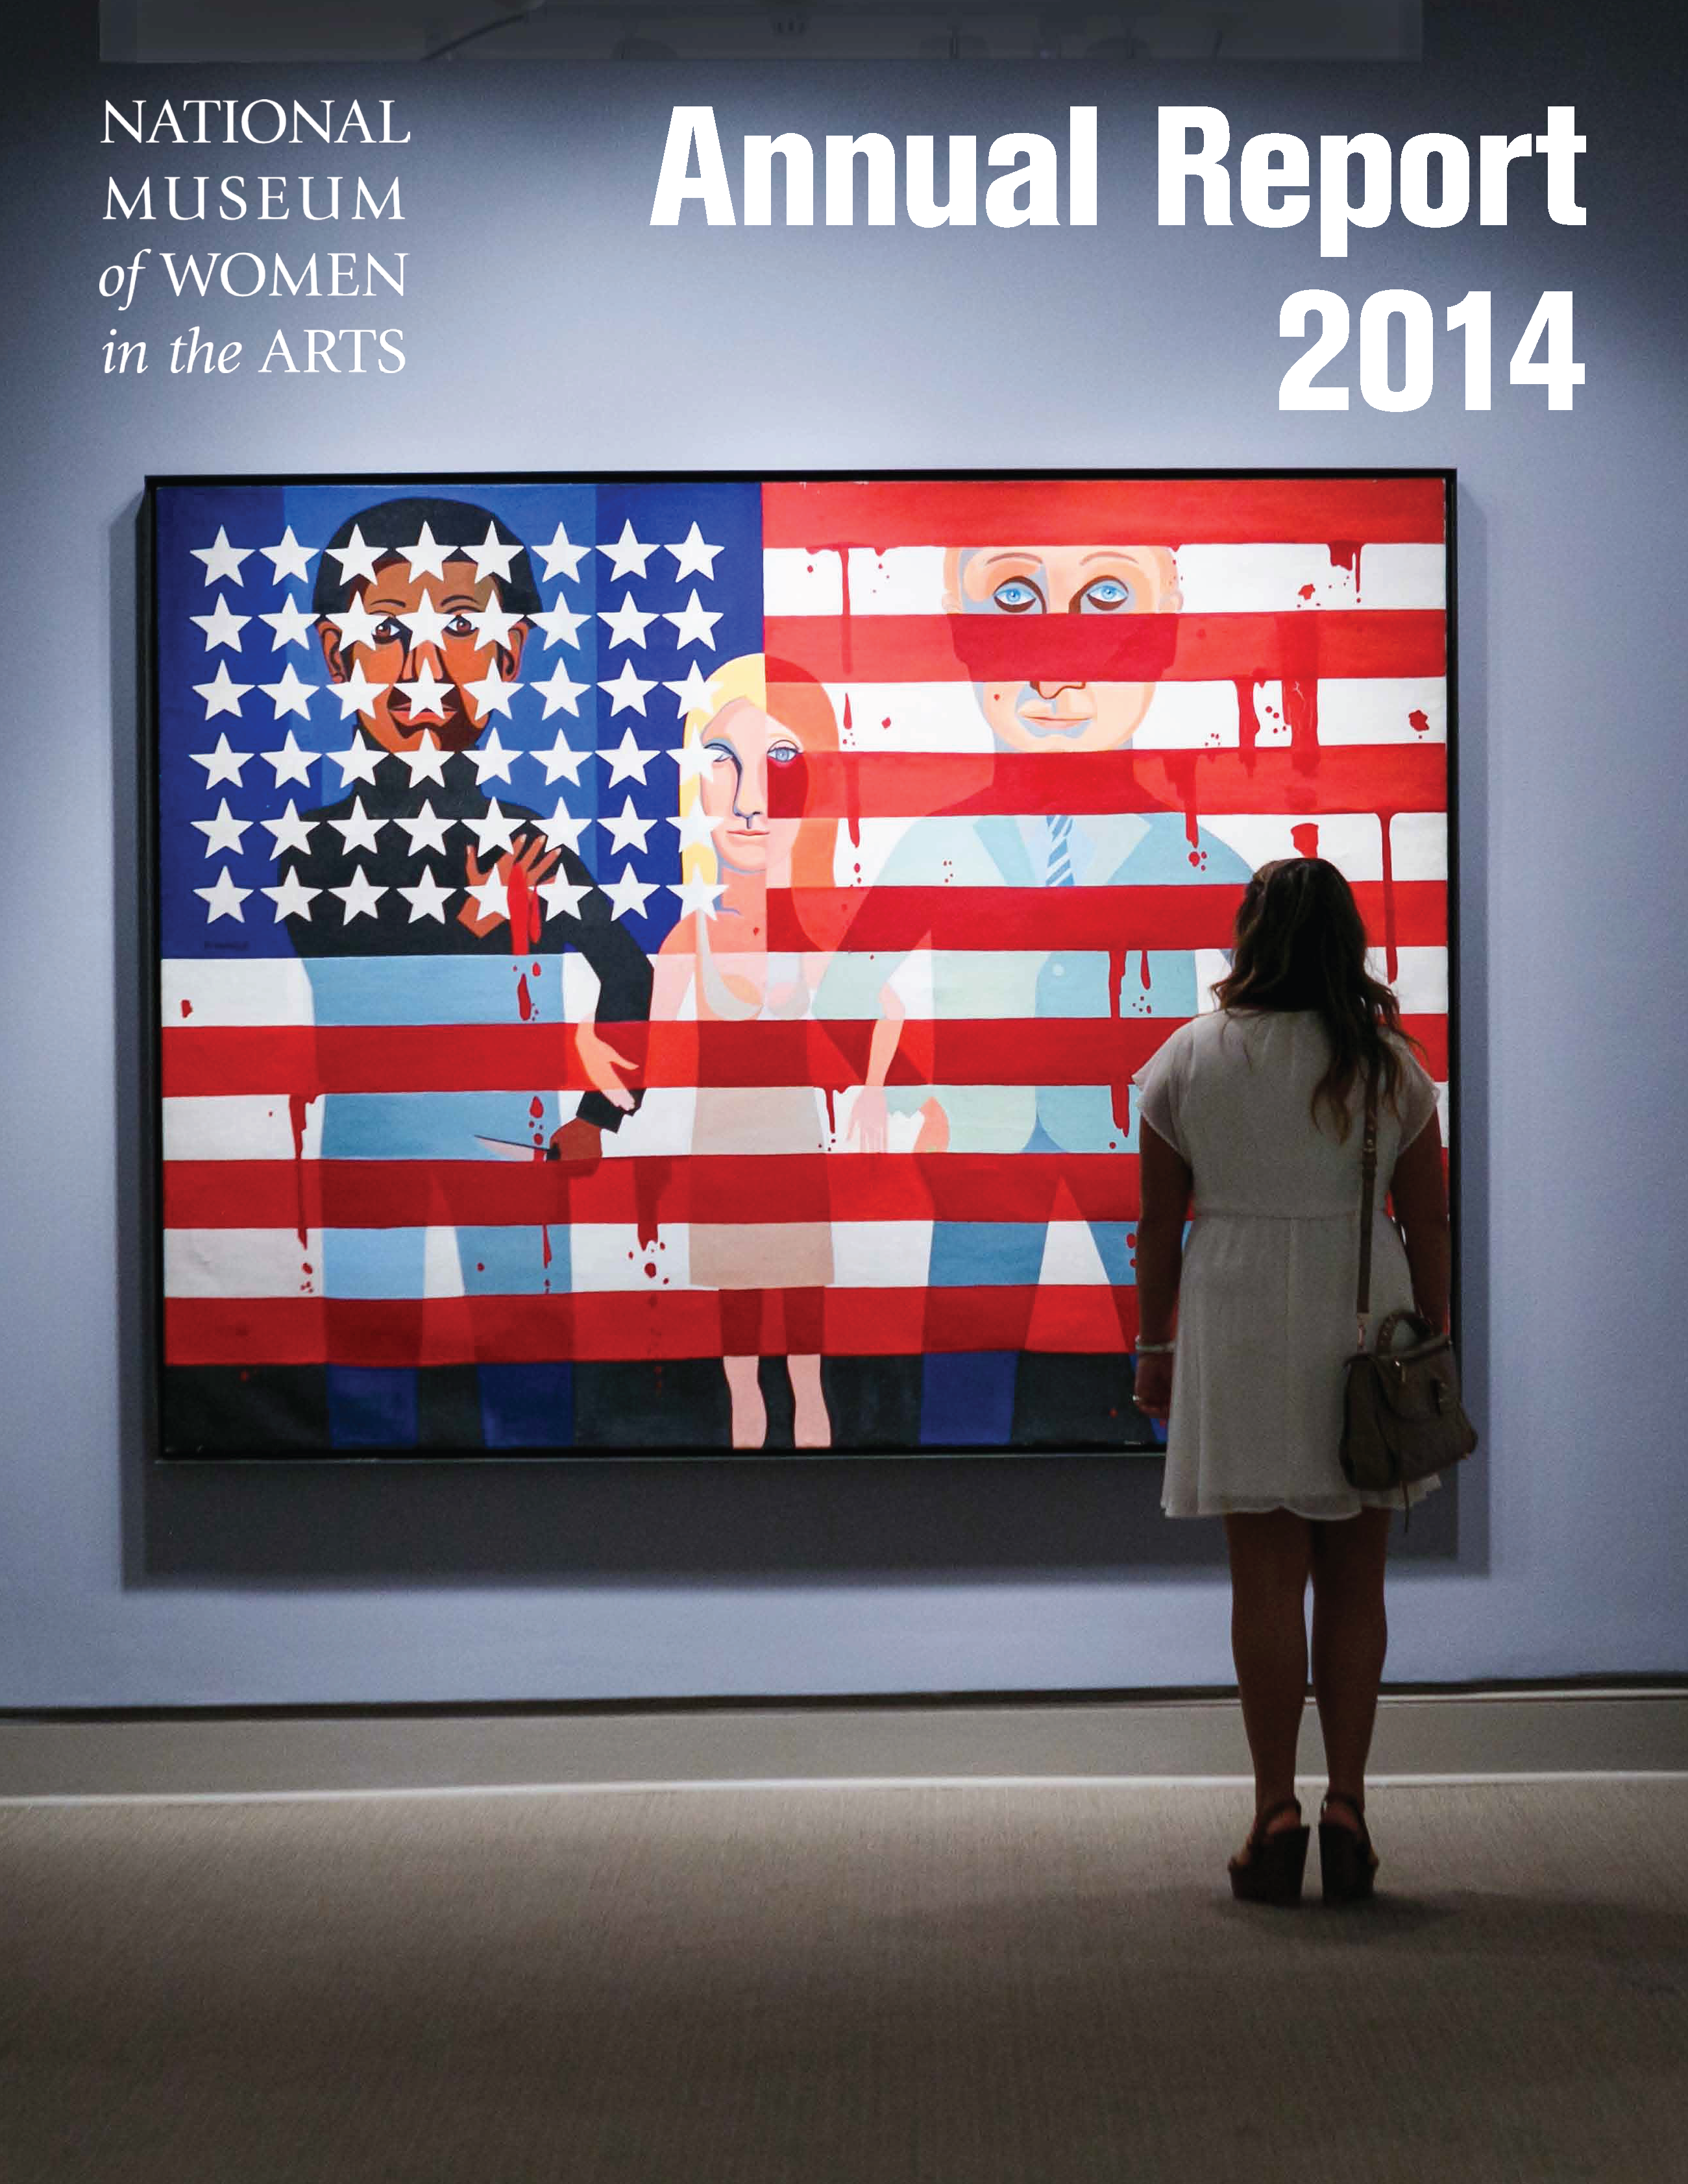 Cover of the 2014 annual report shows a women standing in front of a American flag painting with the text 'Annual Report 2014'